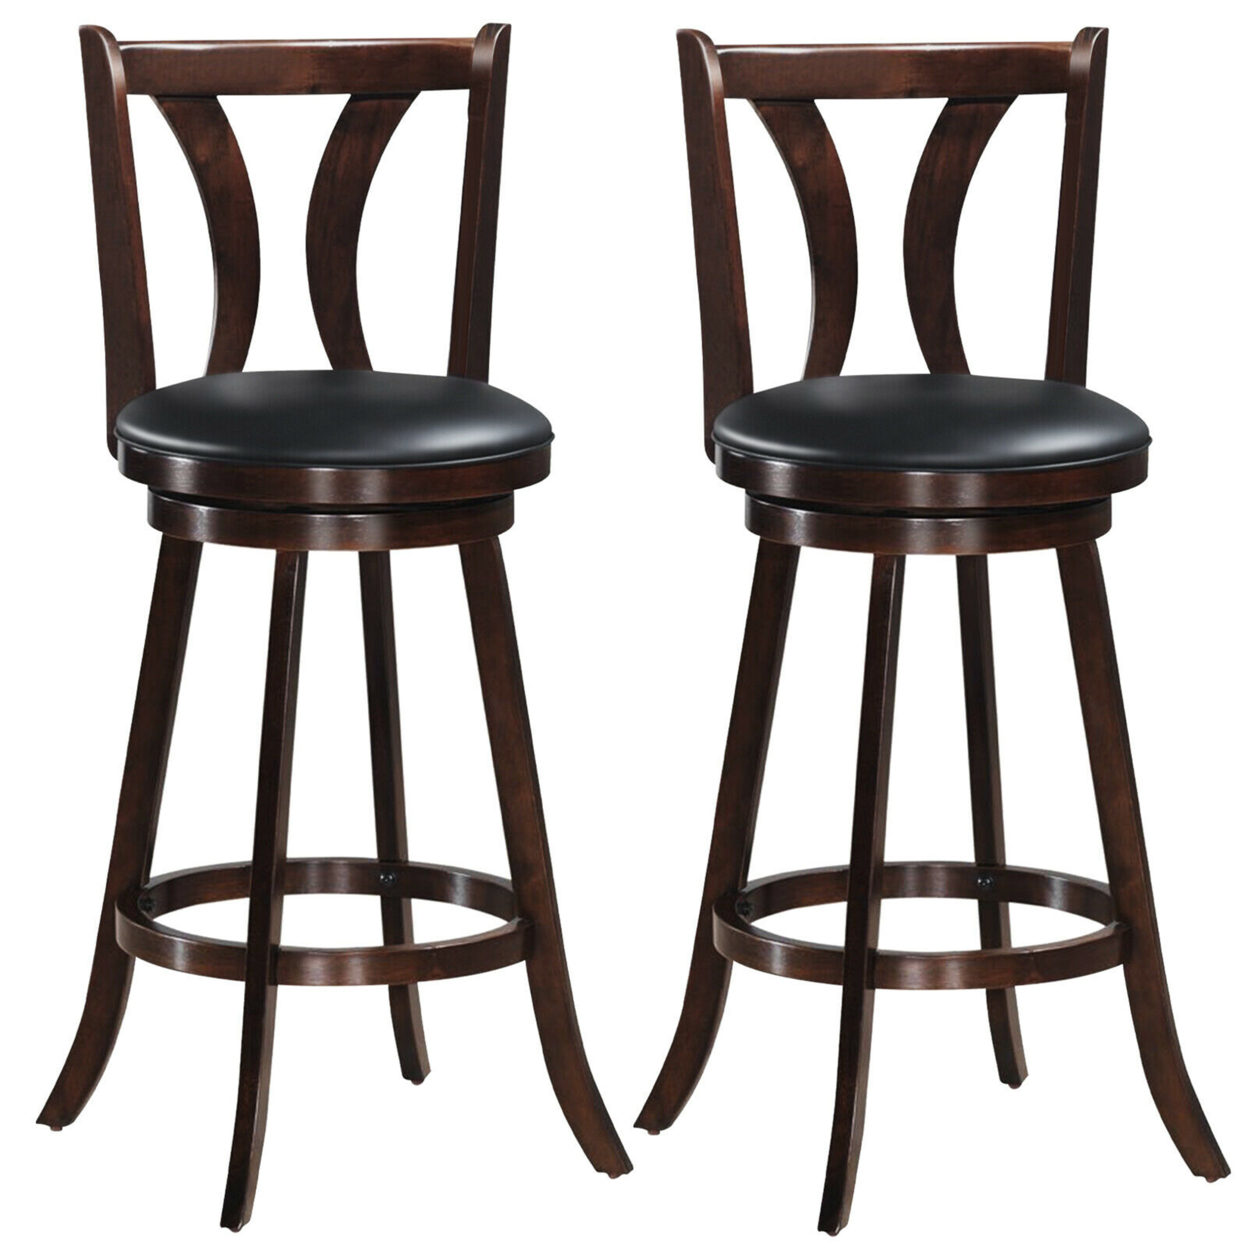 Set Of 2 Swivel Bar Stools 29.5 Bar Height Chairs With Rubber Wood Legs